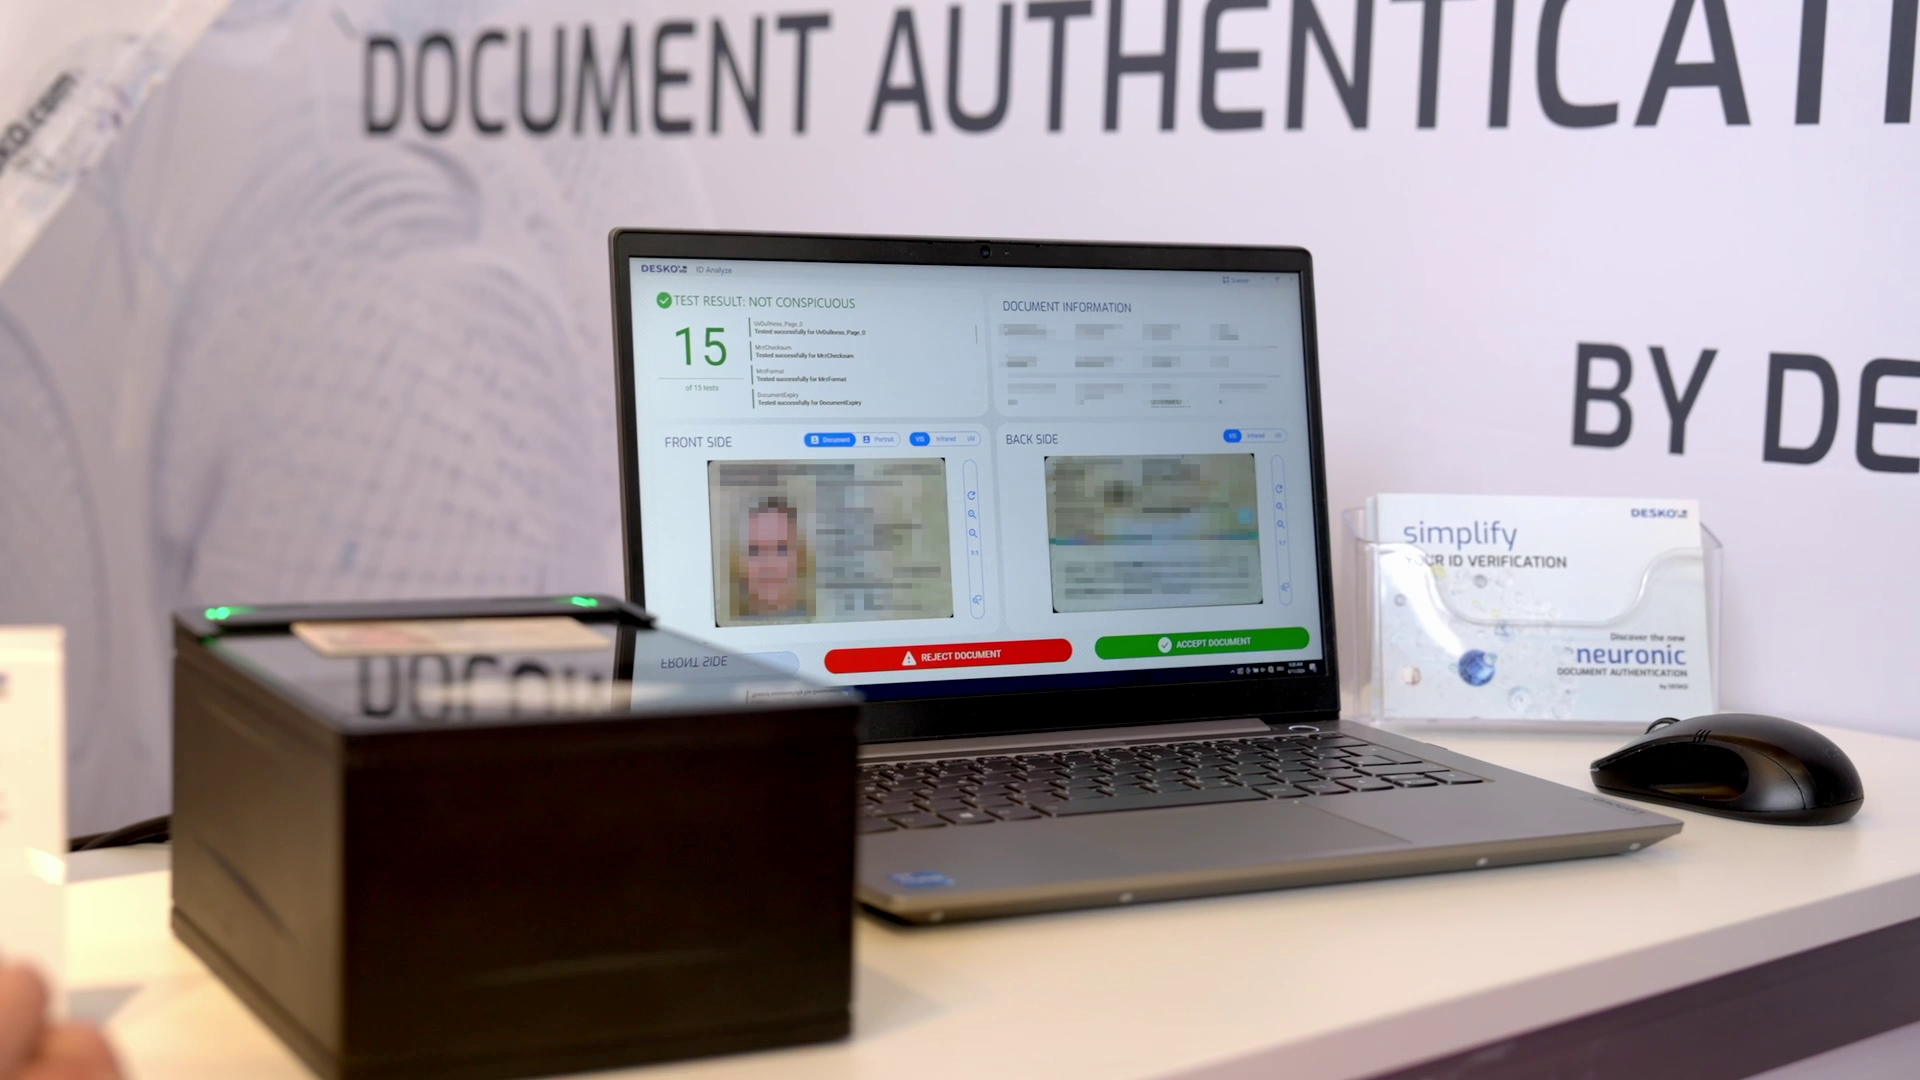 What does NEURONIC DOCUMENT AUTHENTICATION mean?